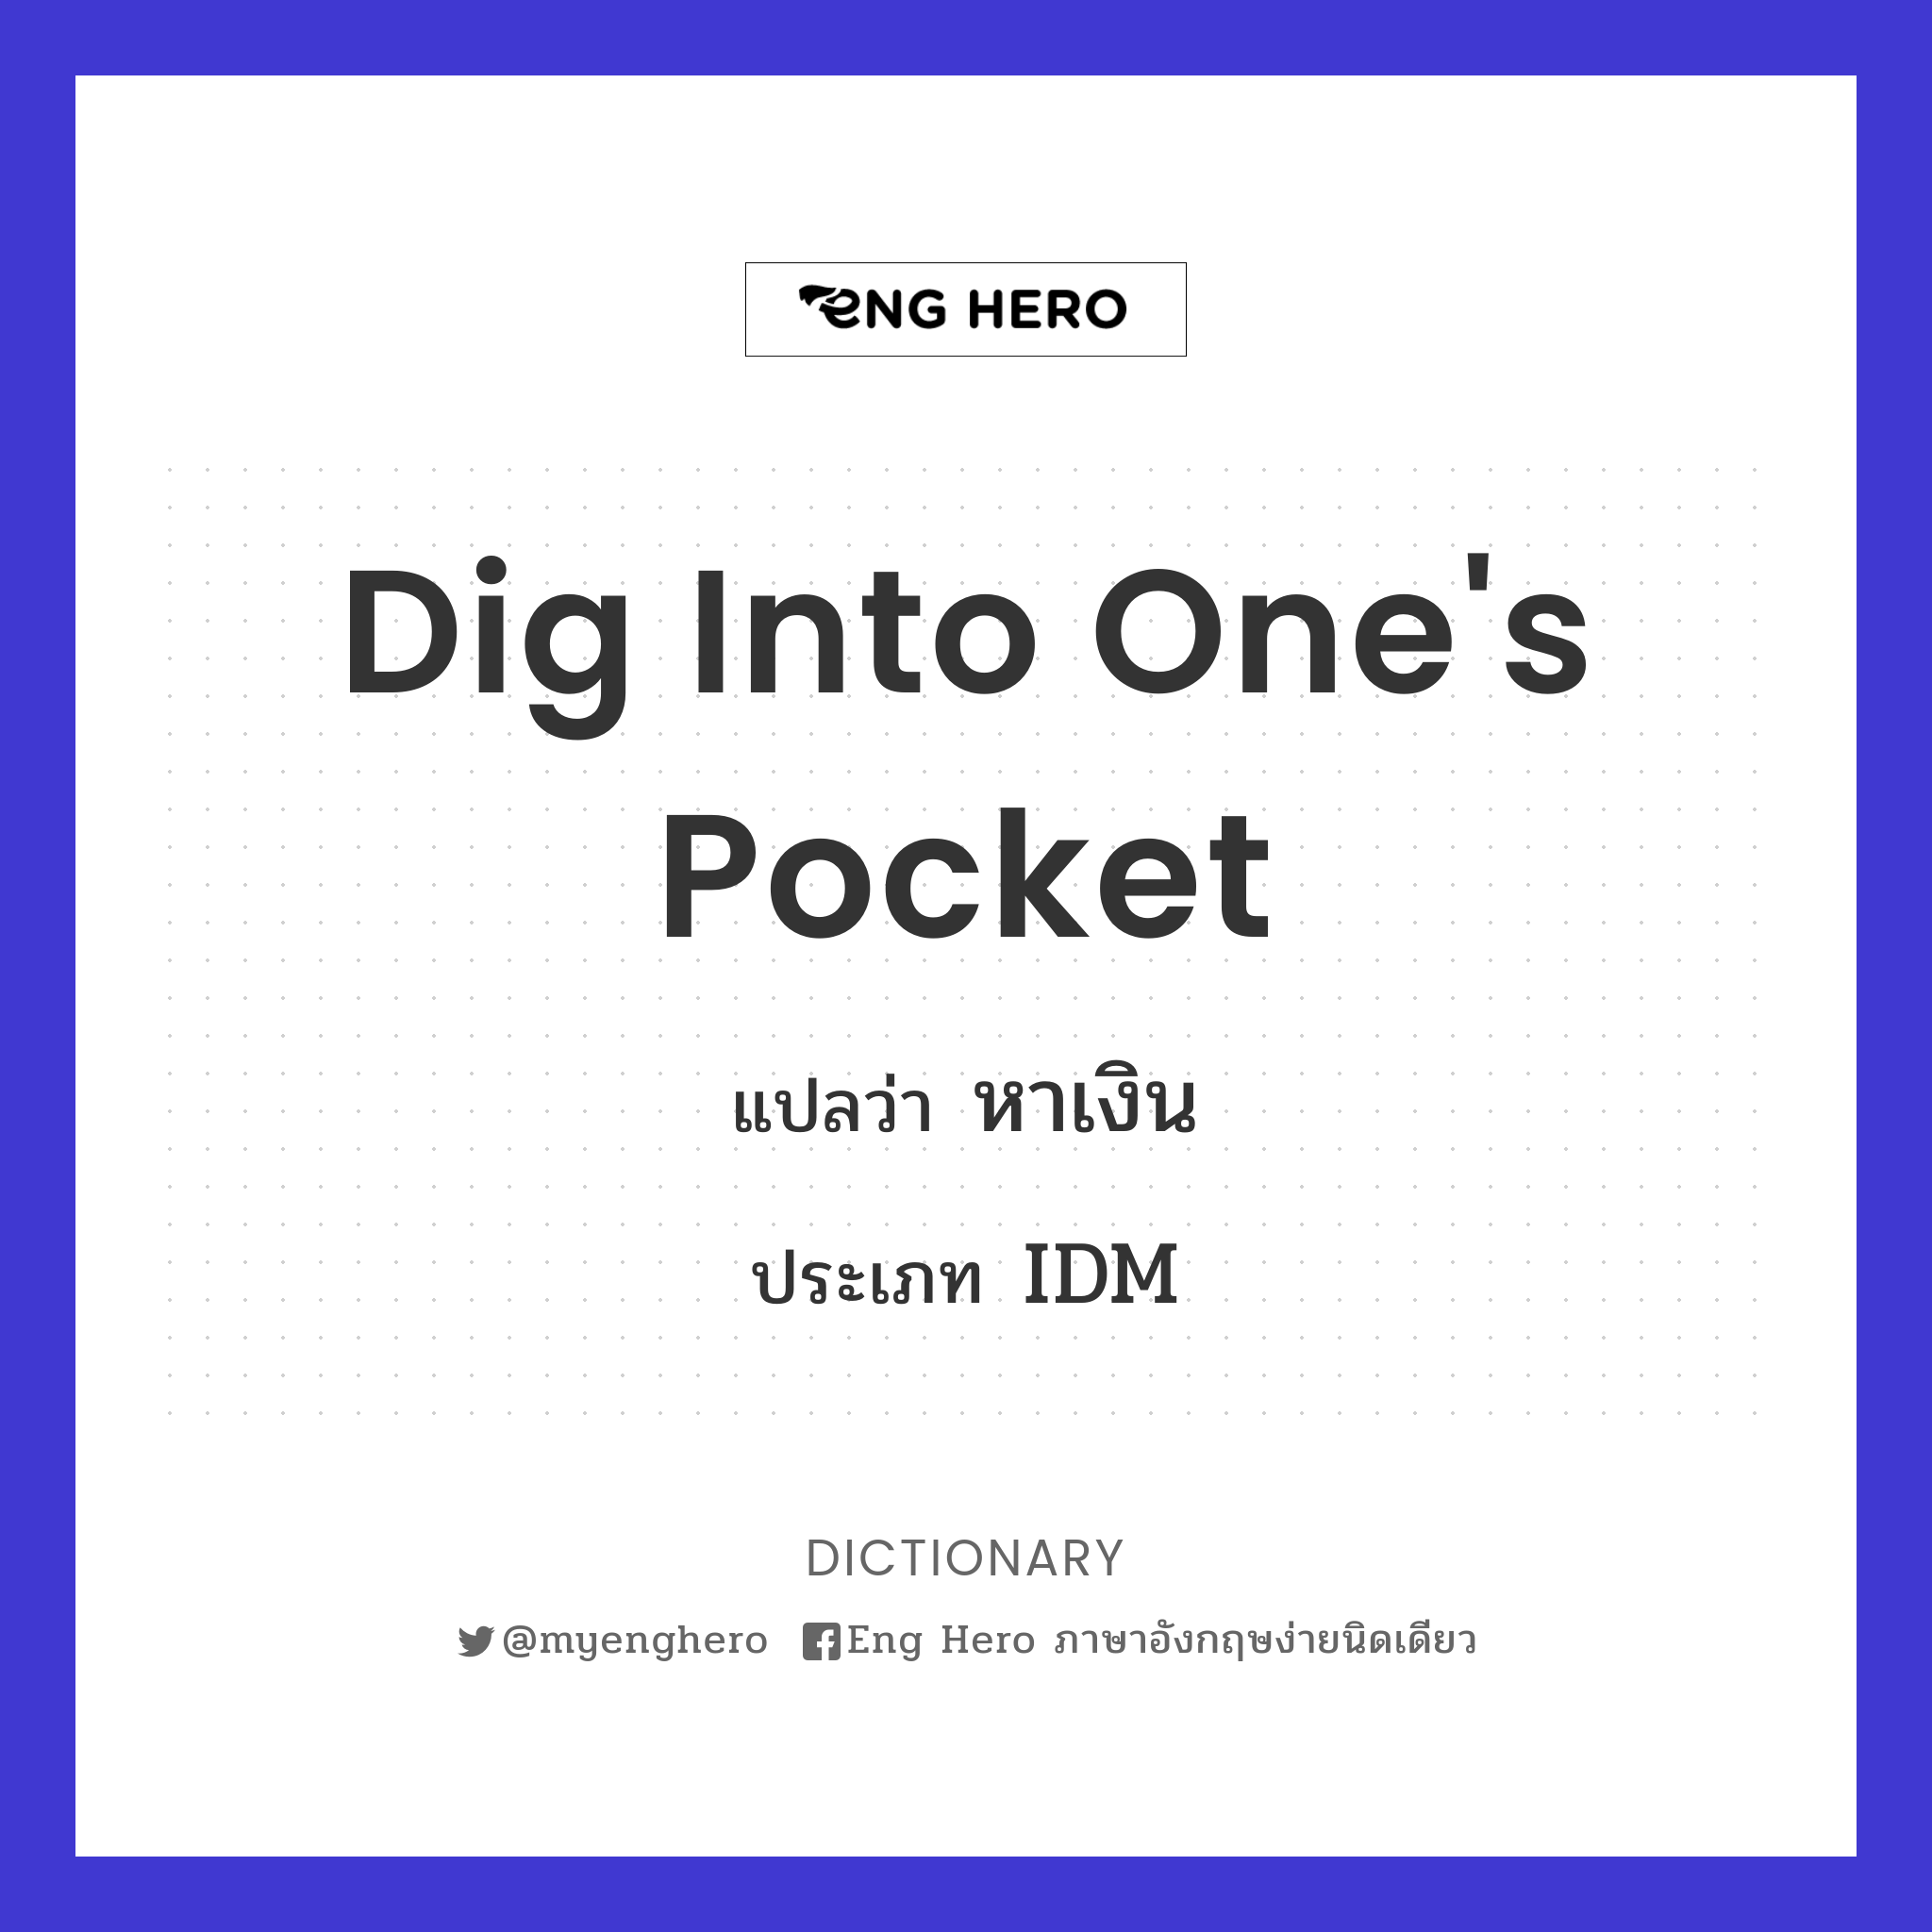 dig into one's pocket